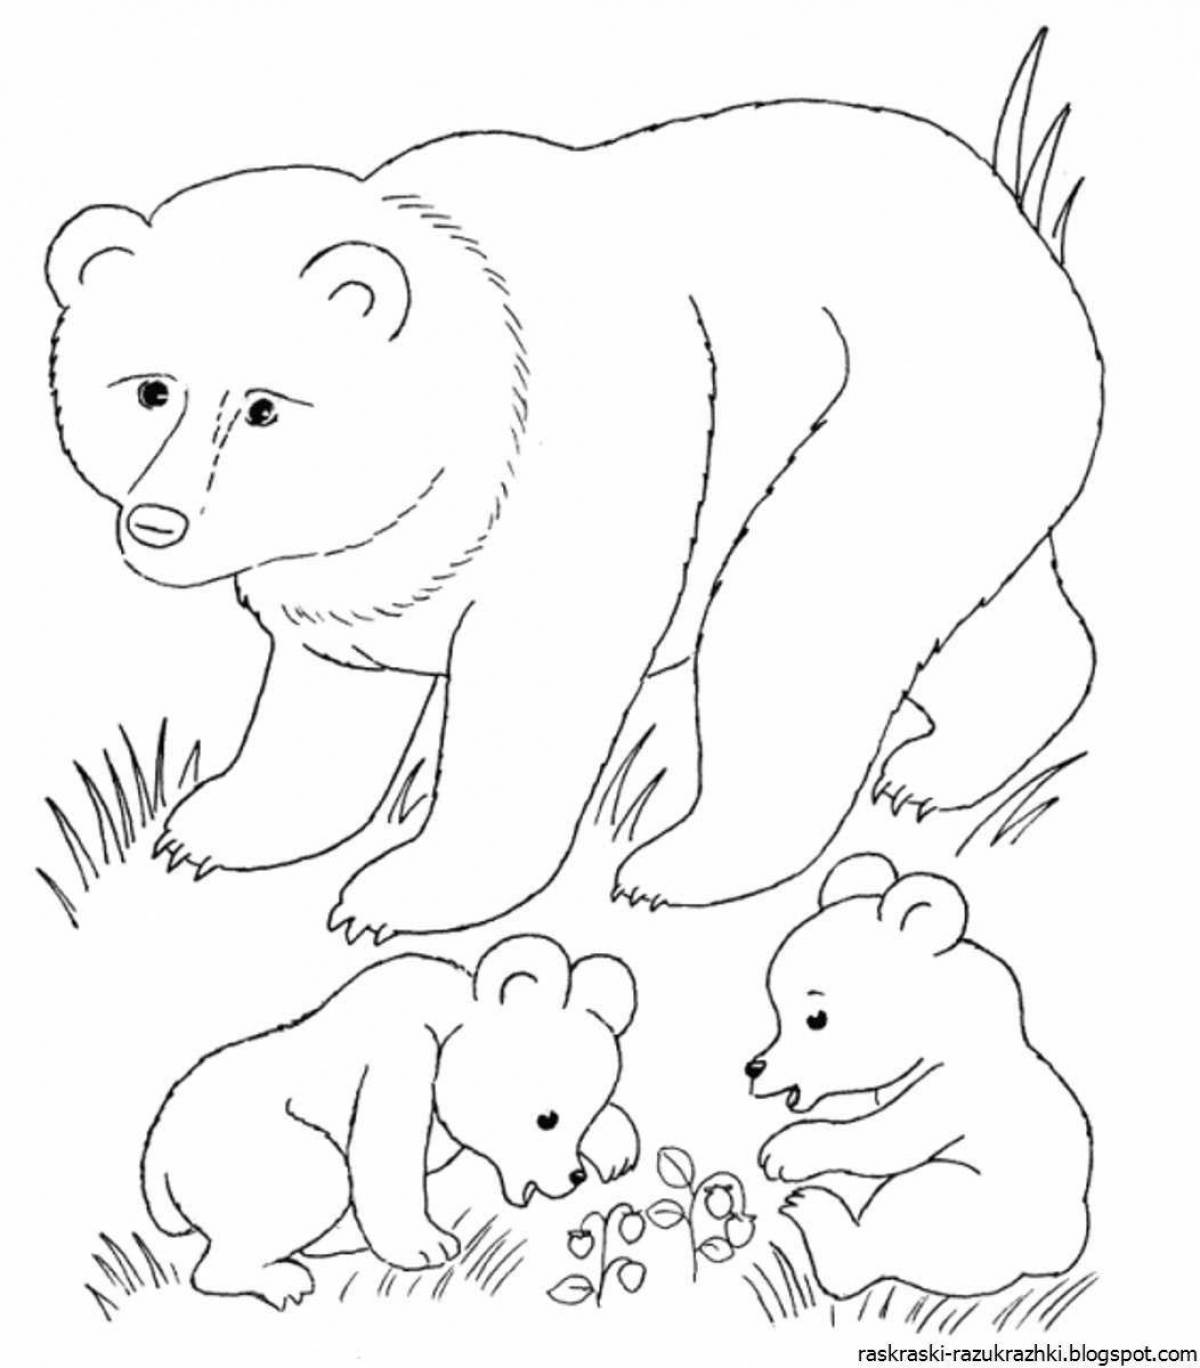 Russian animals for kids #2